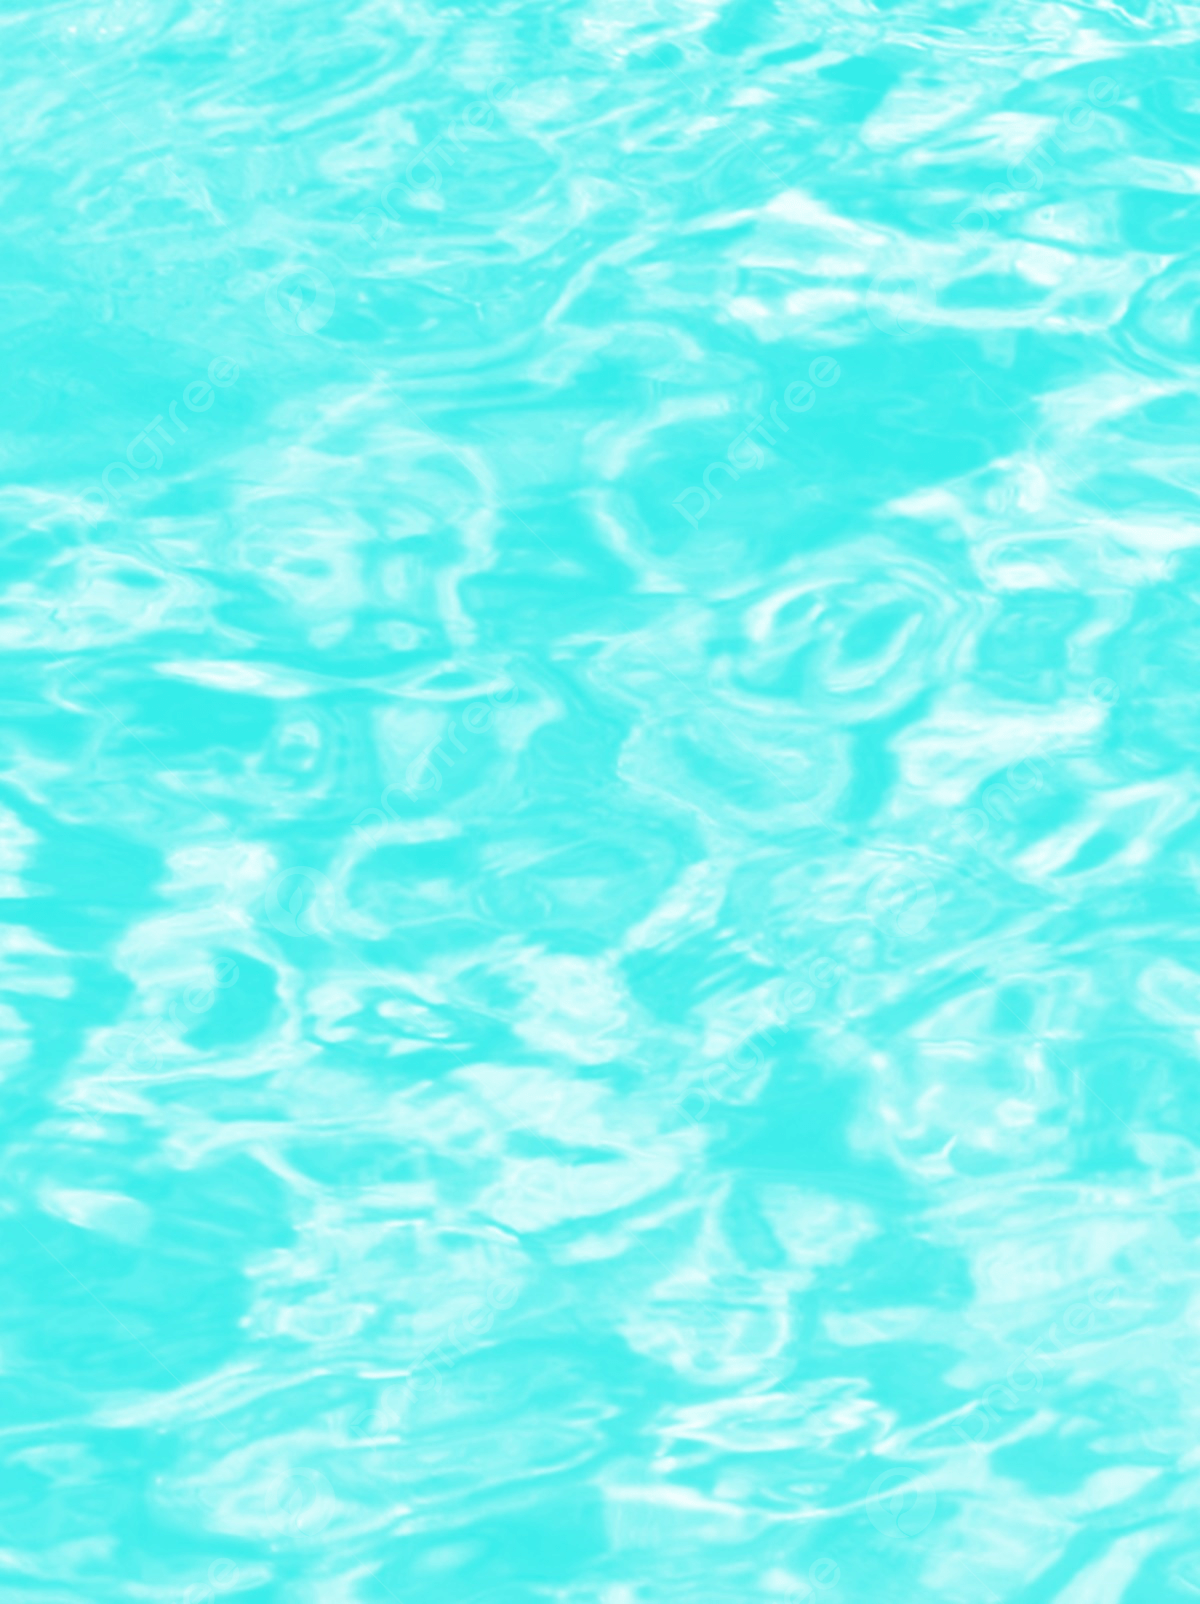 Simple Clear Swimming Pool Water Background Wallpaper Image For Free Download